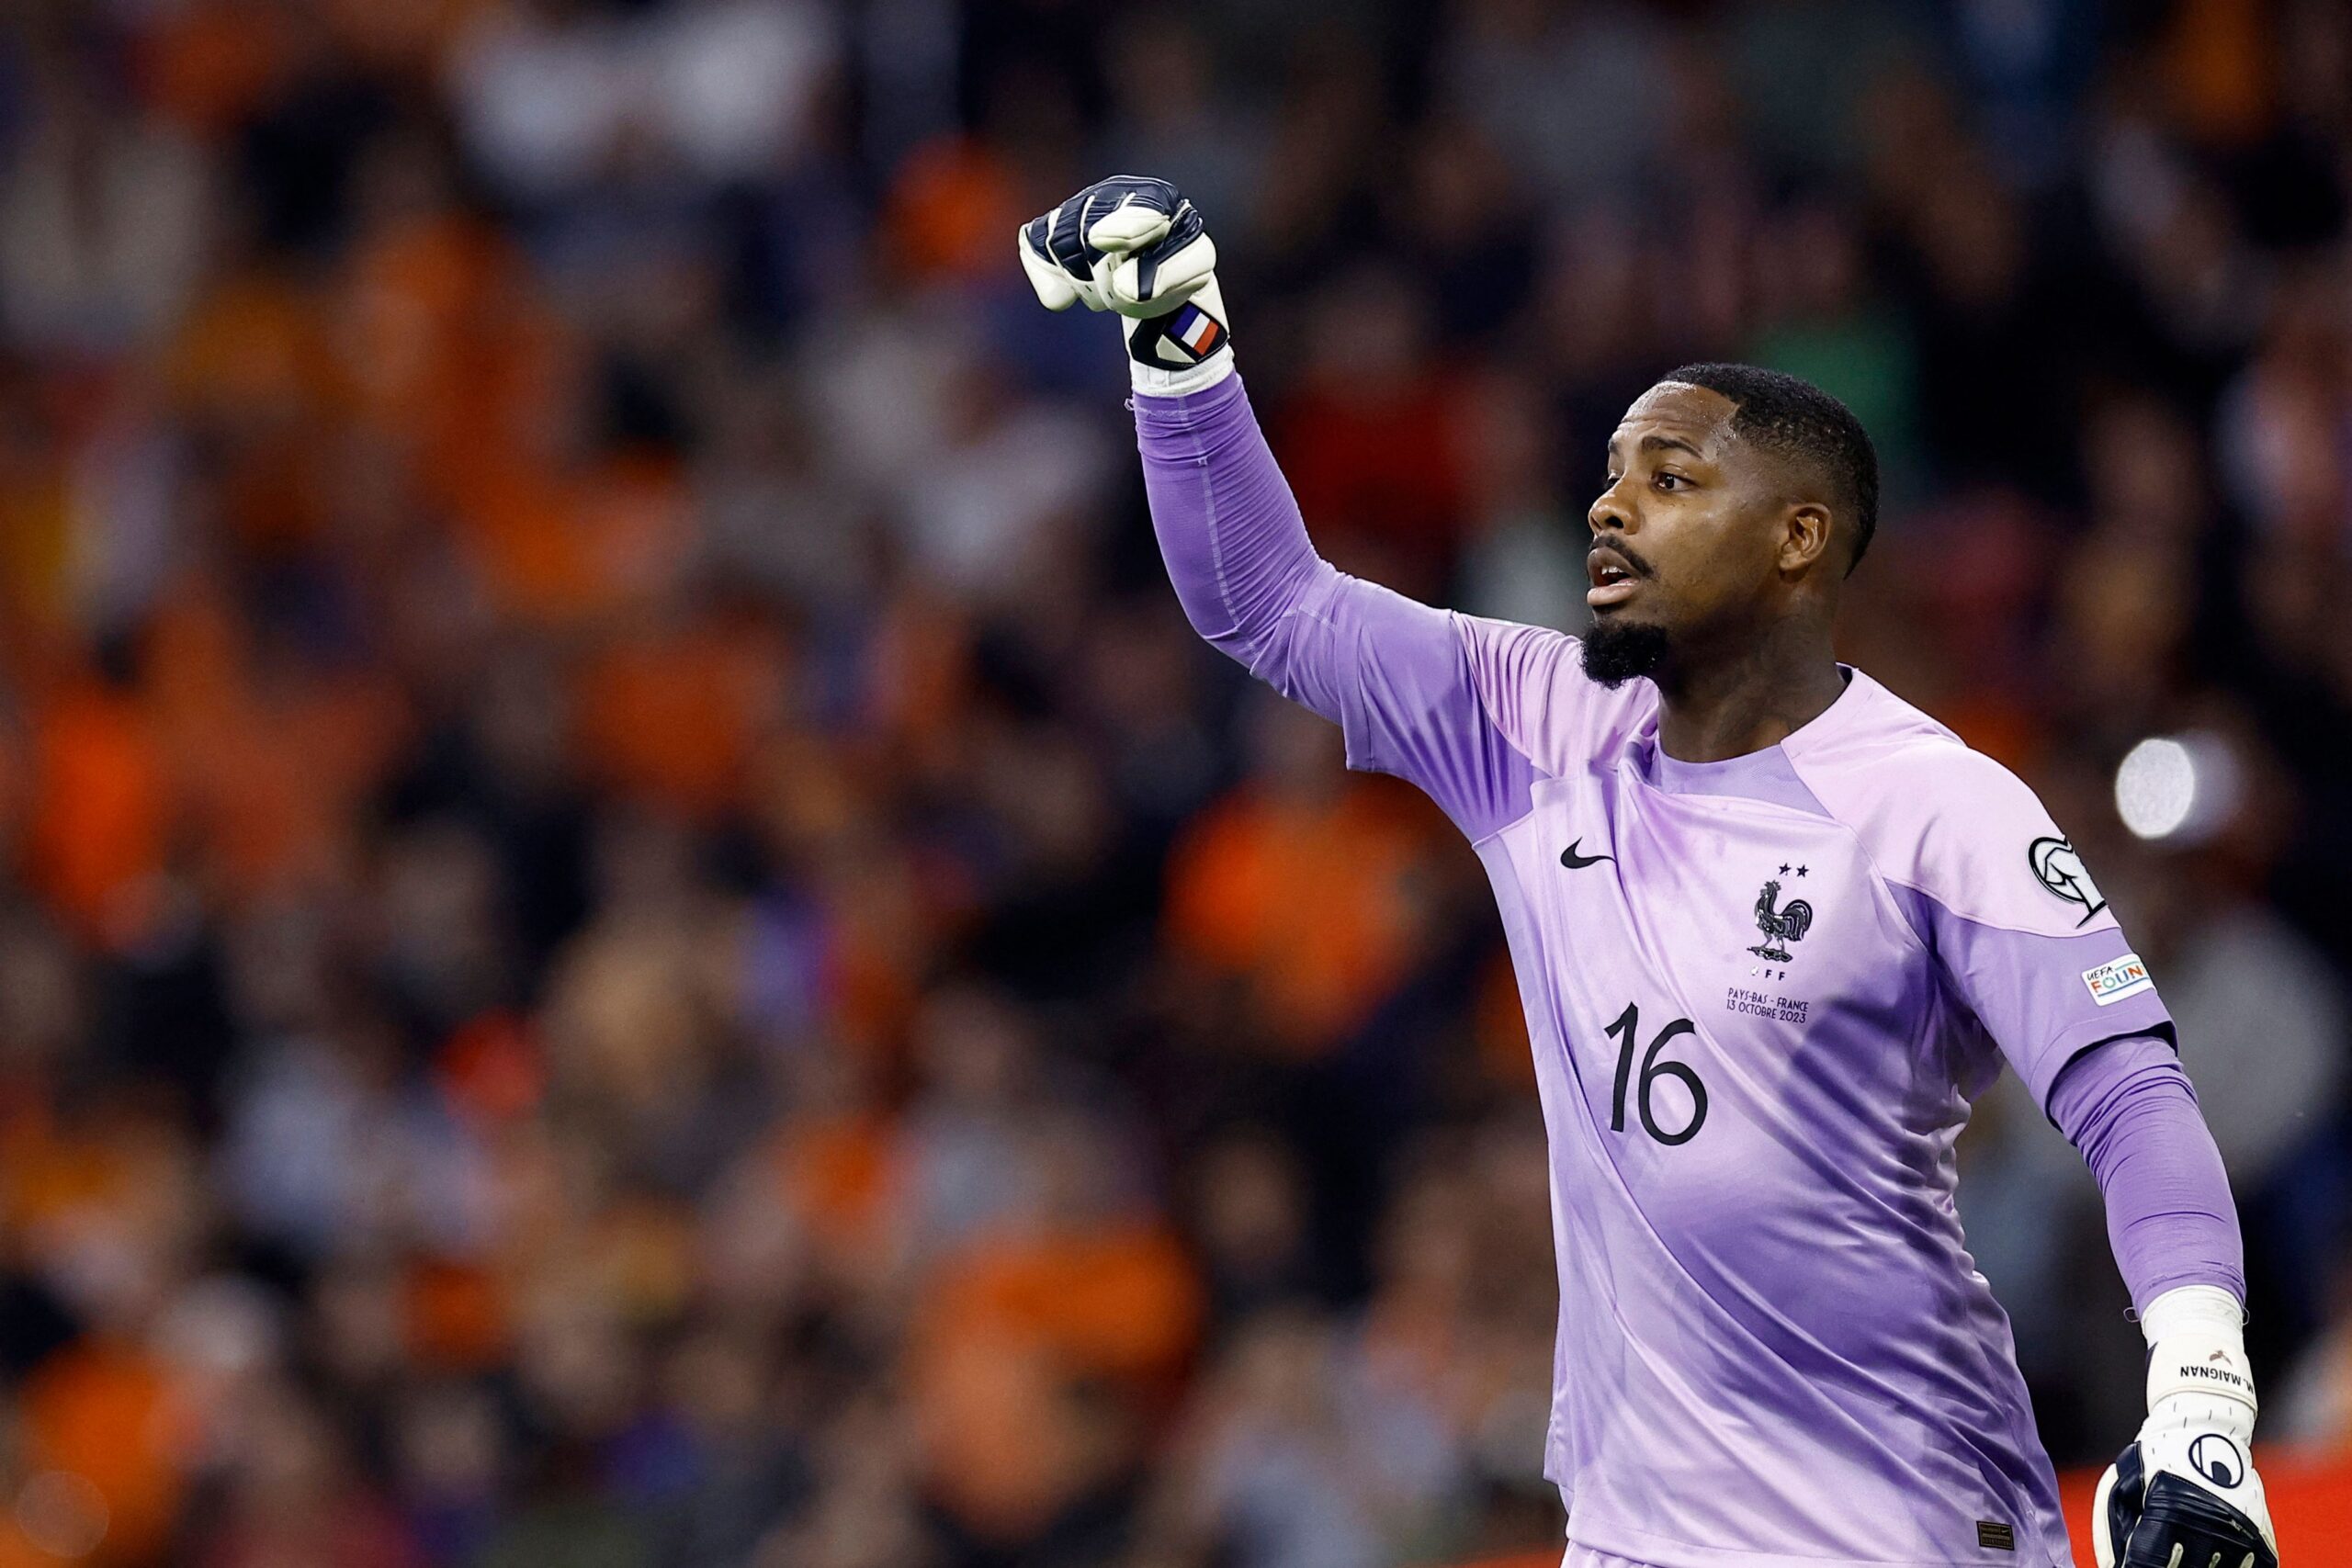 France's goalkeeper Mike Maignan gestures during the Euro 2024 qualifying football match between the Netherlands and France at the Johan Cruijff ArenA in Amsterdam on October 13, 2023. (Photo by KENZO TRIBOUILLARD / AFP) (Photo by KENZO TRIBOUILLARD/AFP via Getty Images)